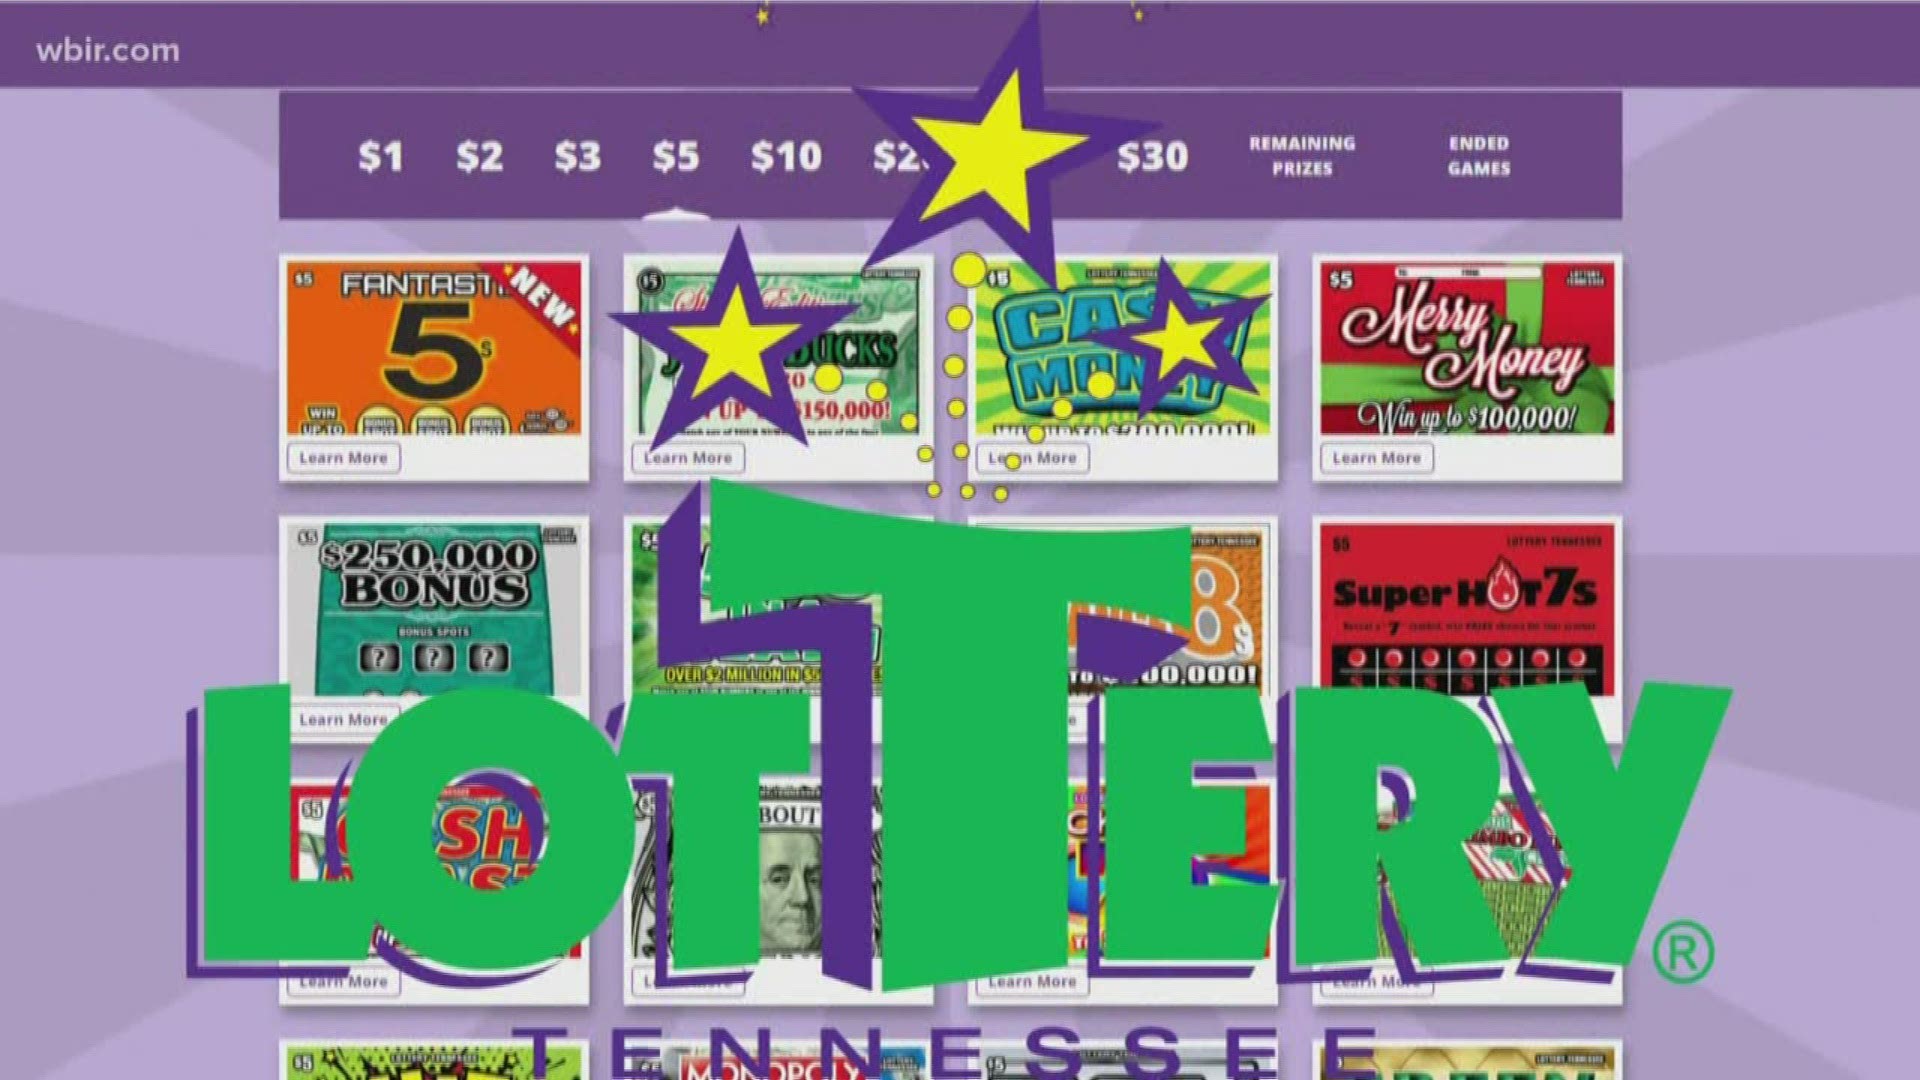 People spent over four times as much on scratch offs than music and movies combined. What are the odds of actually winning?